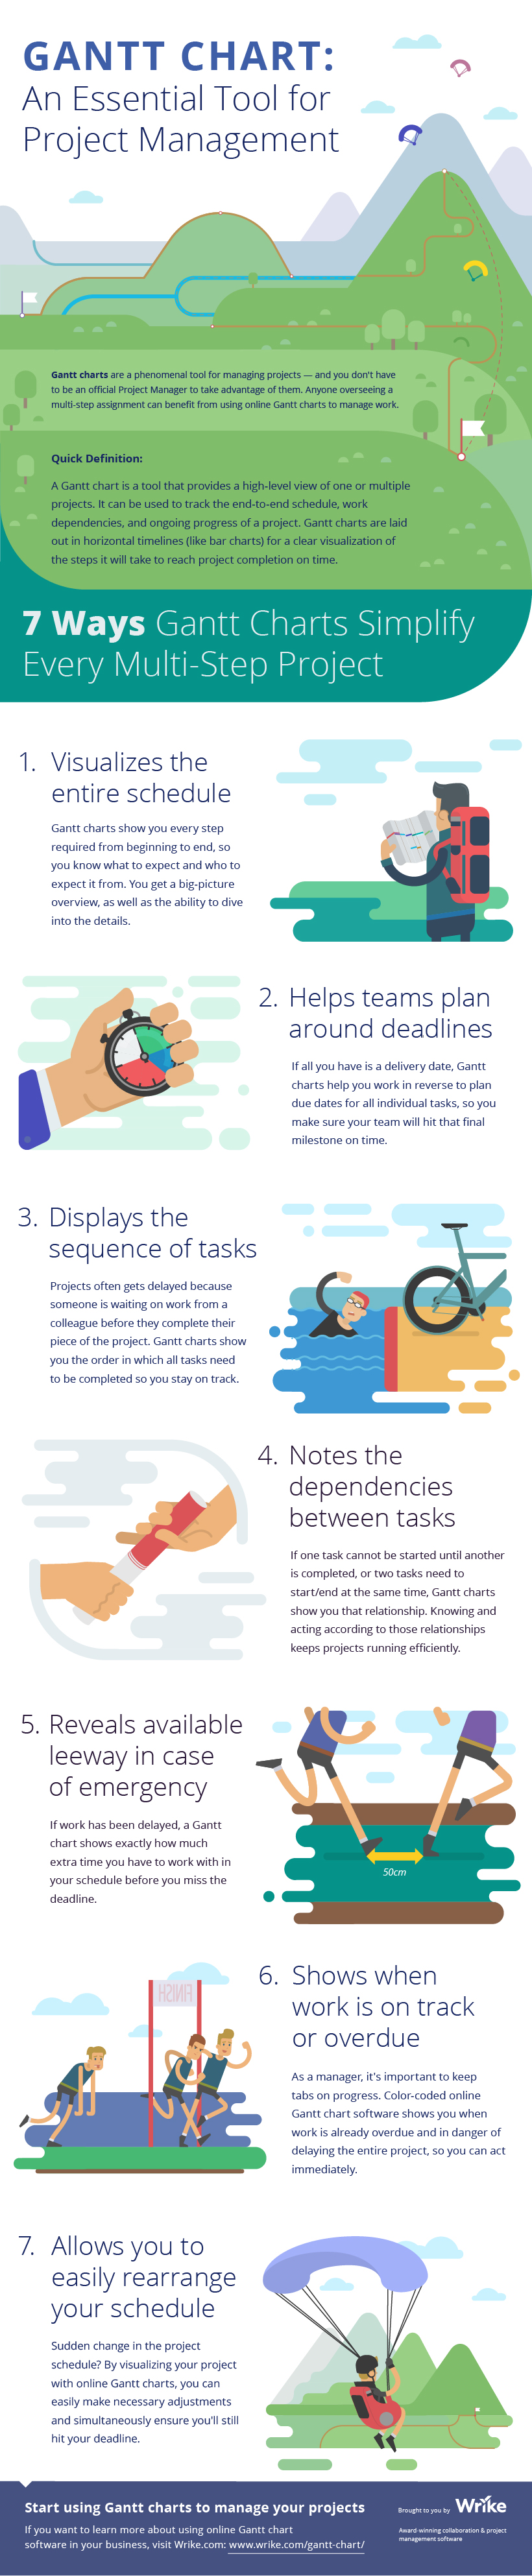 Gantt Chart Software: A Key Tool For Project Management (#Infographic)